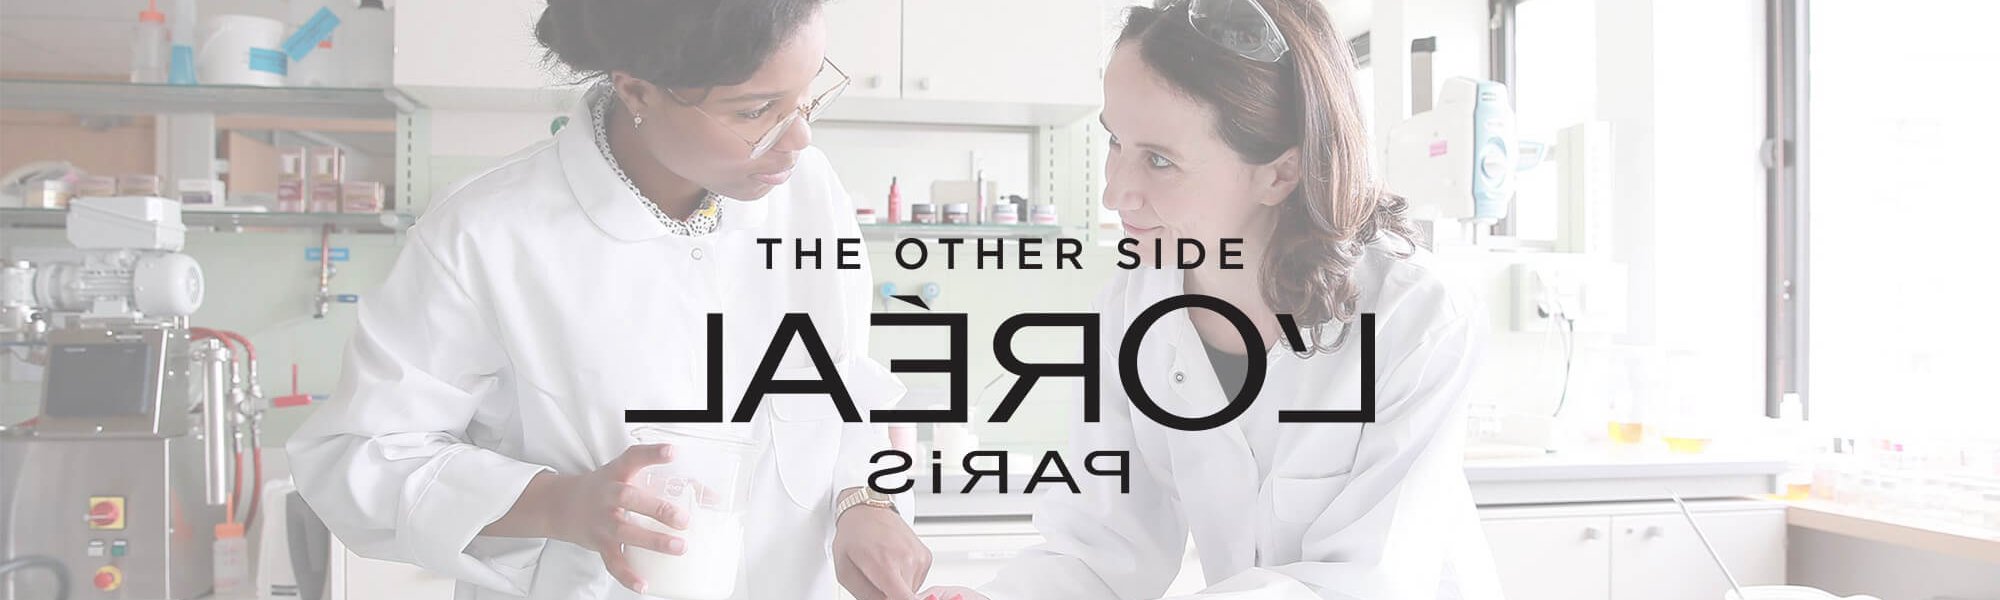 The Other Side Hero Banner 1